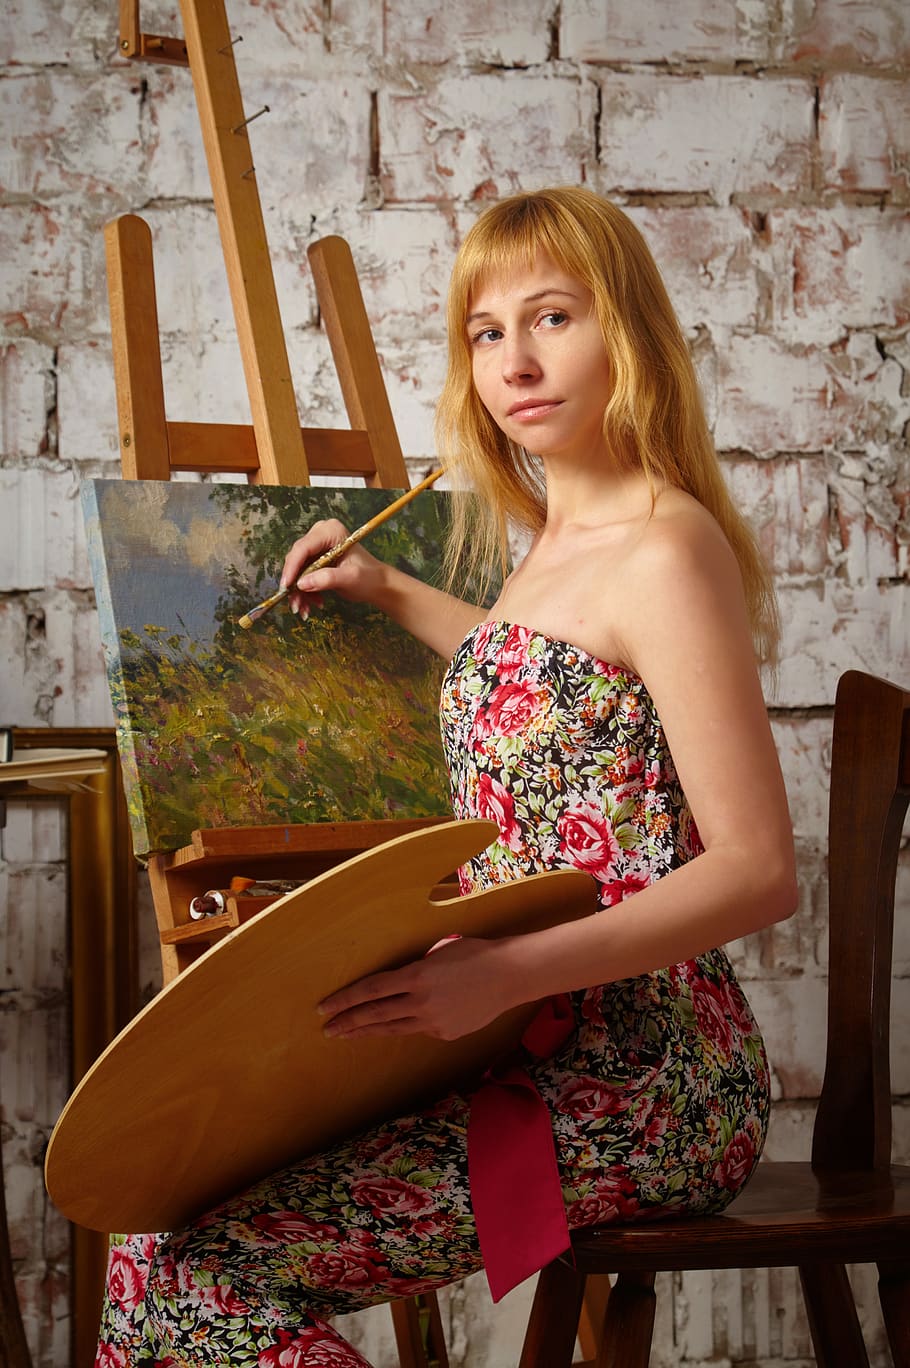 artist, easel, art, painting, creativity, training, hobby, to draw, figure, one person